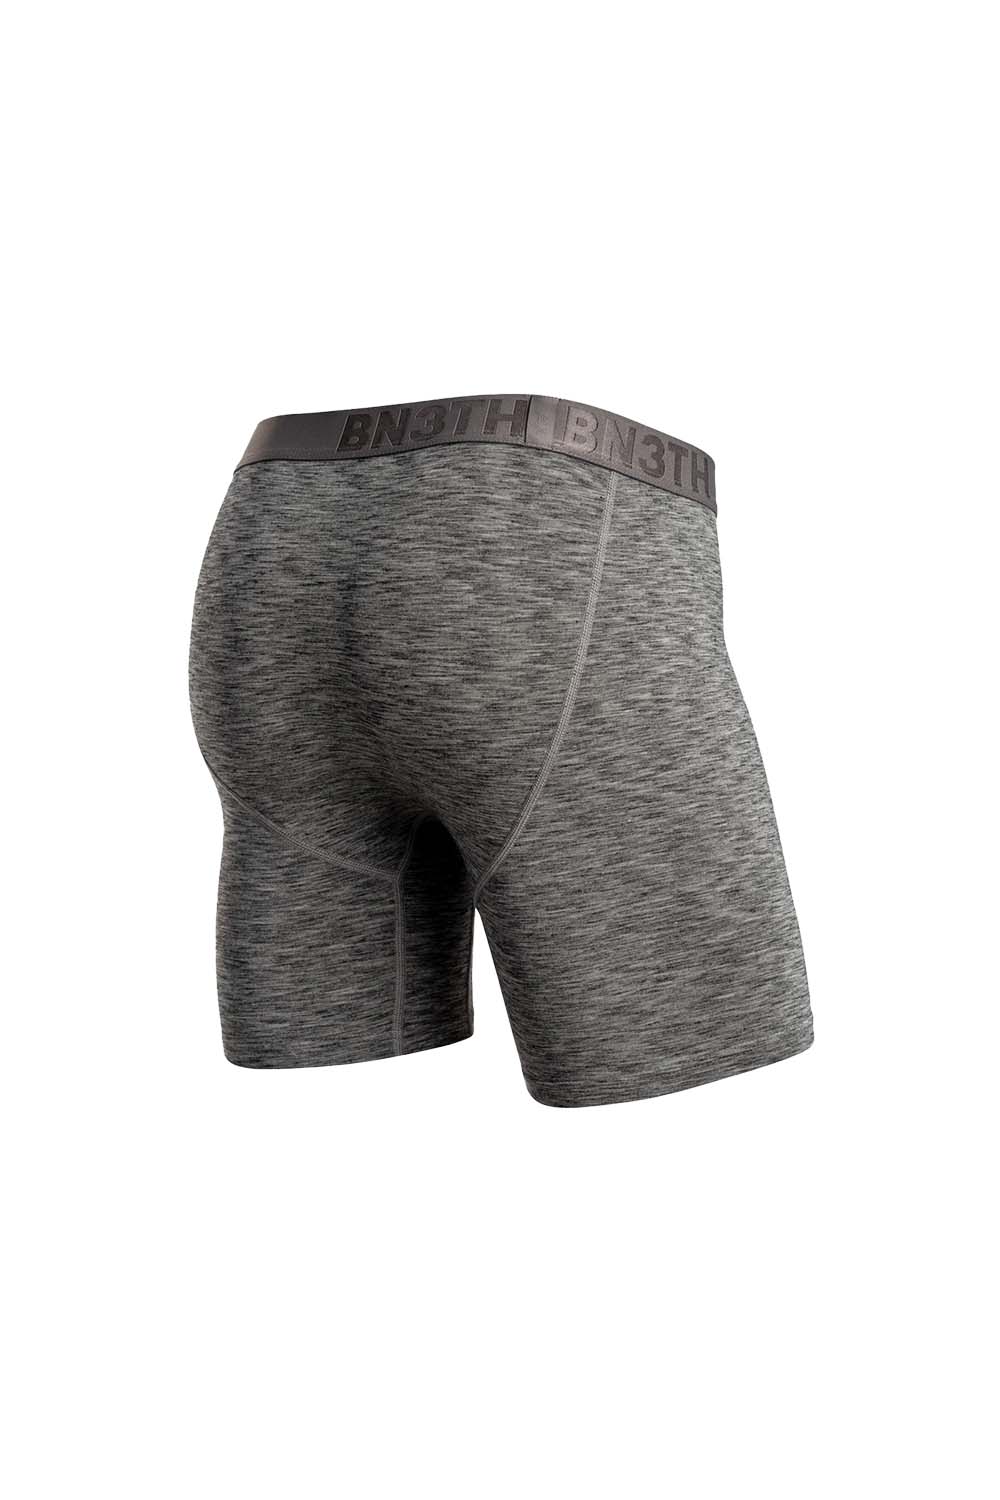 BN3TH - Classic Boxer Brief with Fly - Heather Charcoal - Back